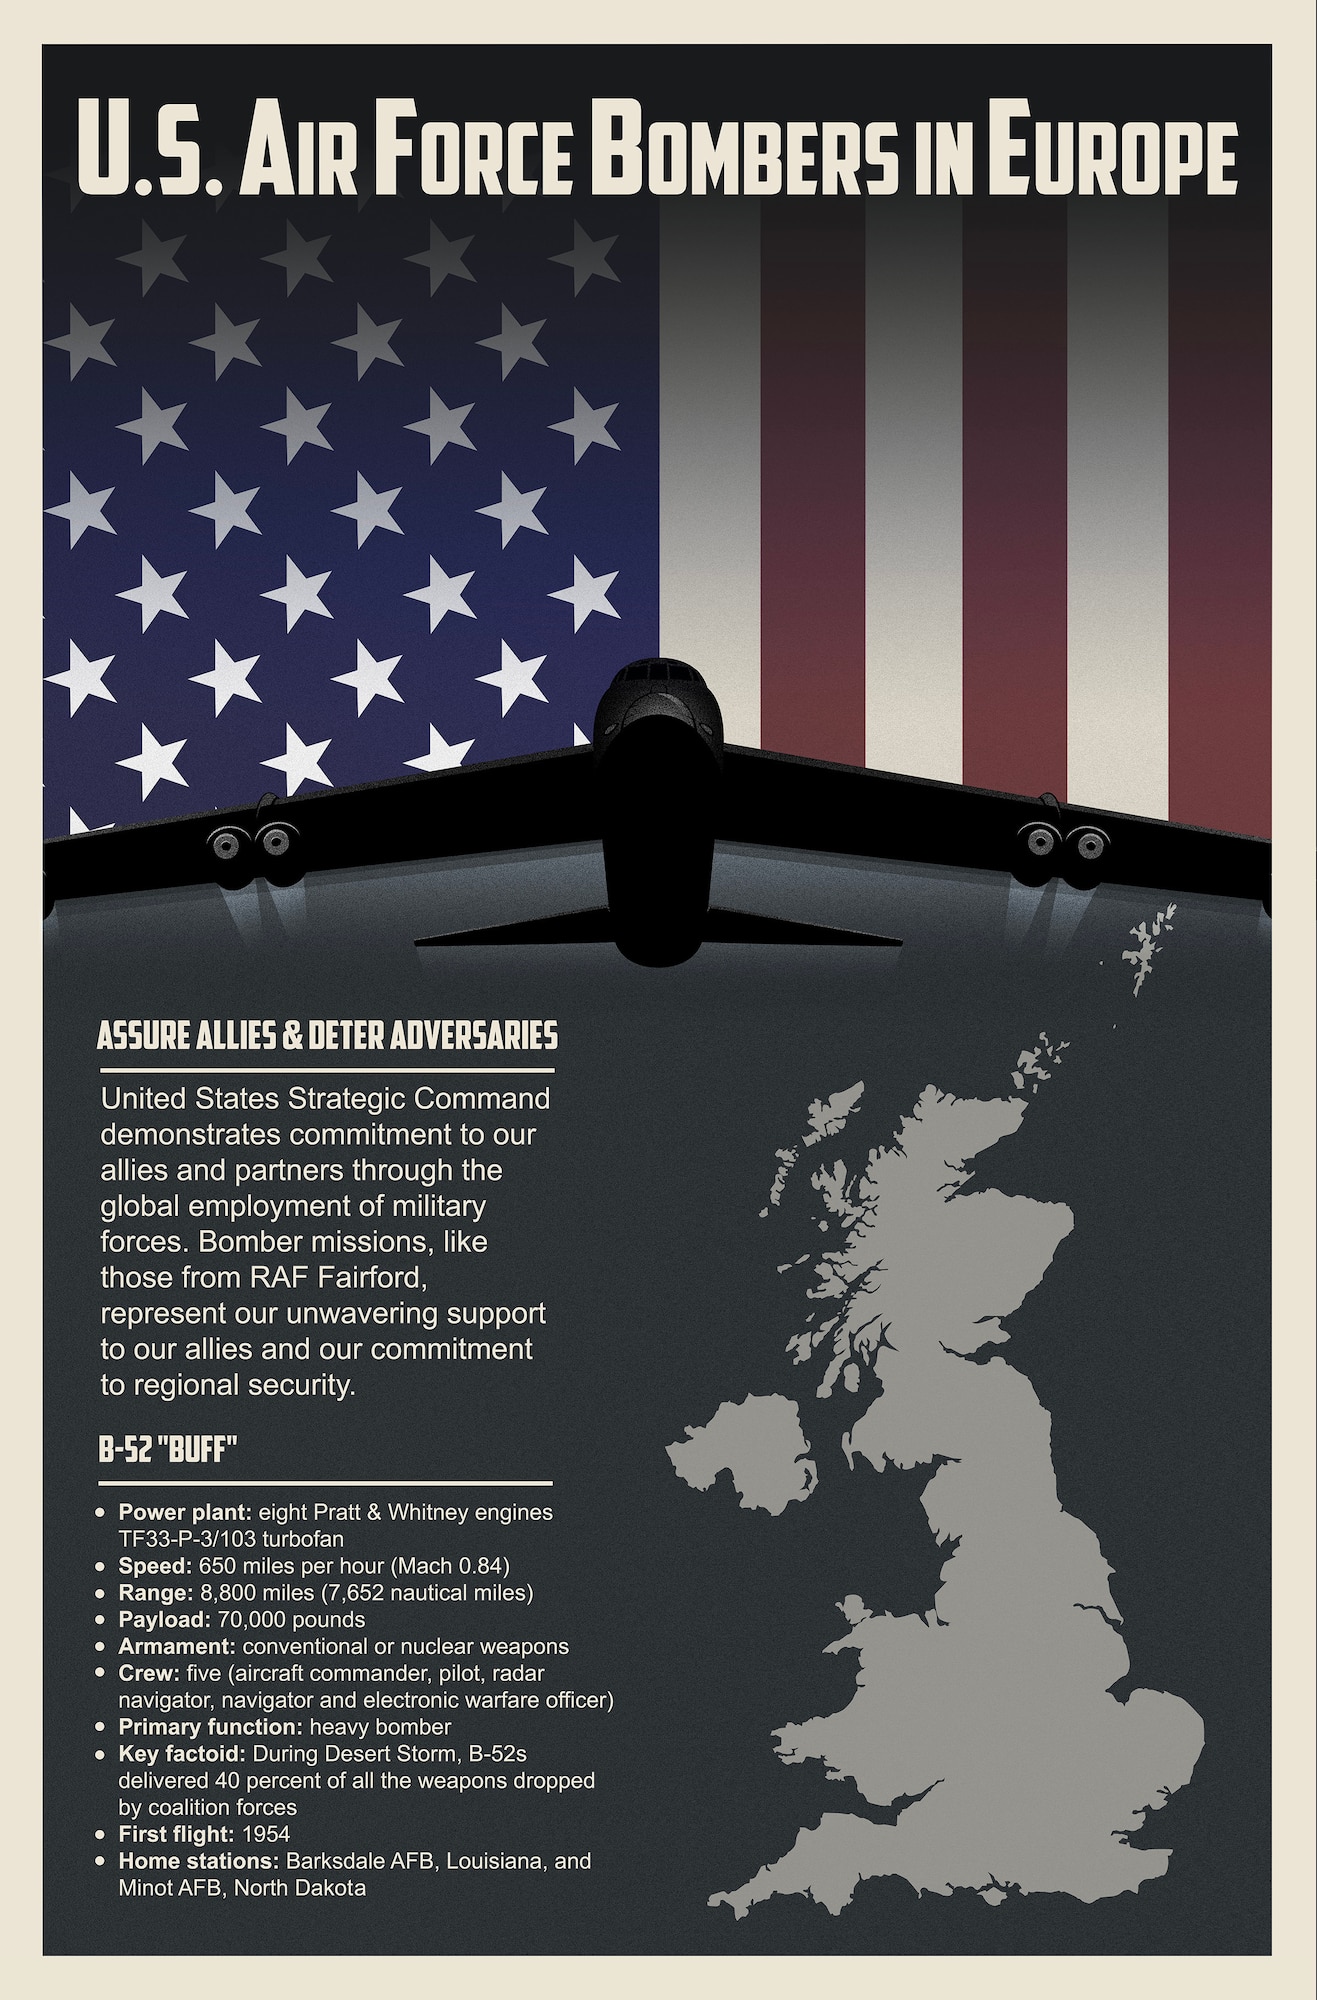 This U.S. Air Force Bombers in Europe poster provides details regarding the capabilities of the B-52 Stratofortress.